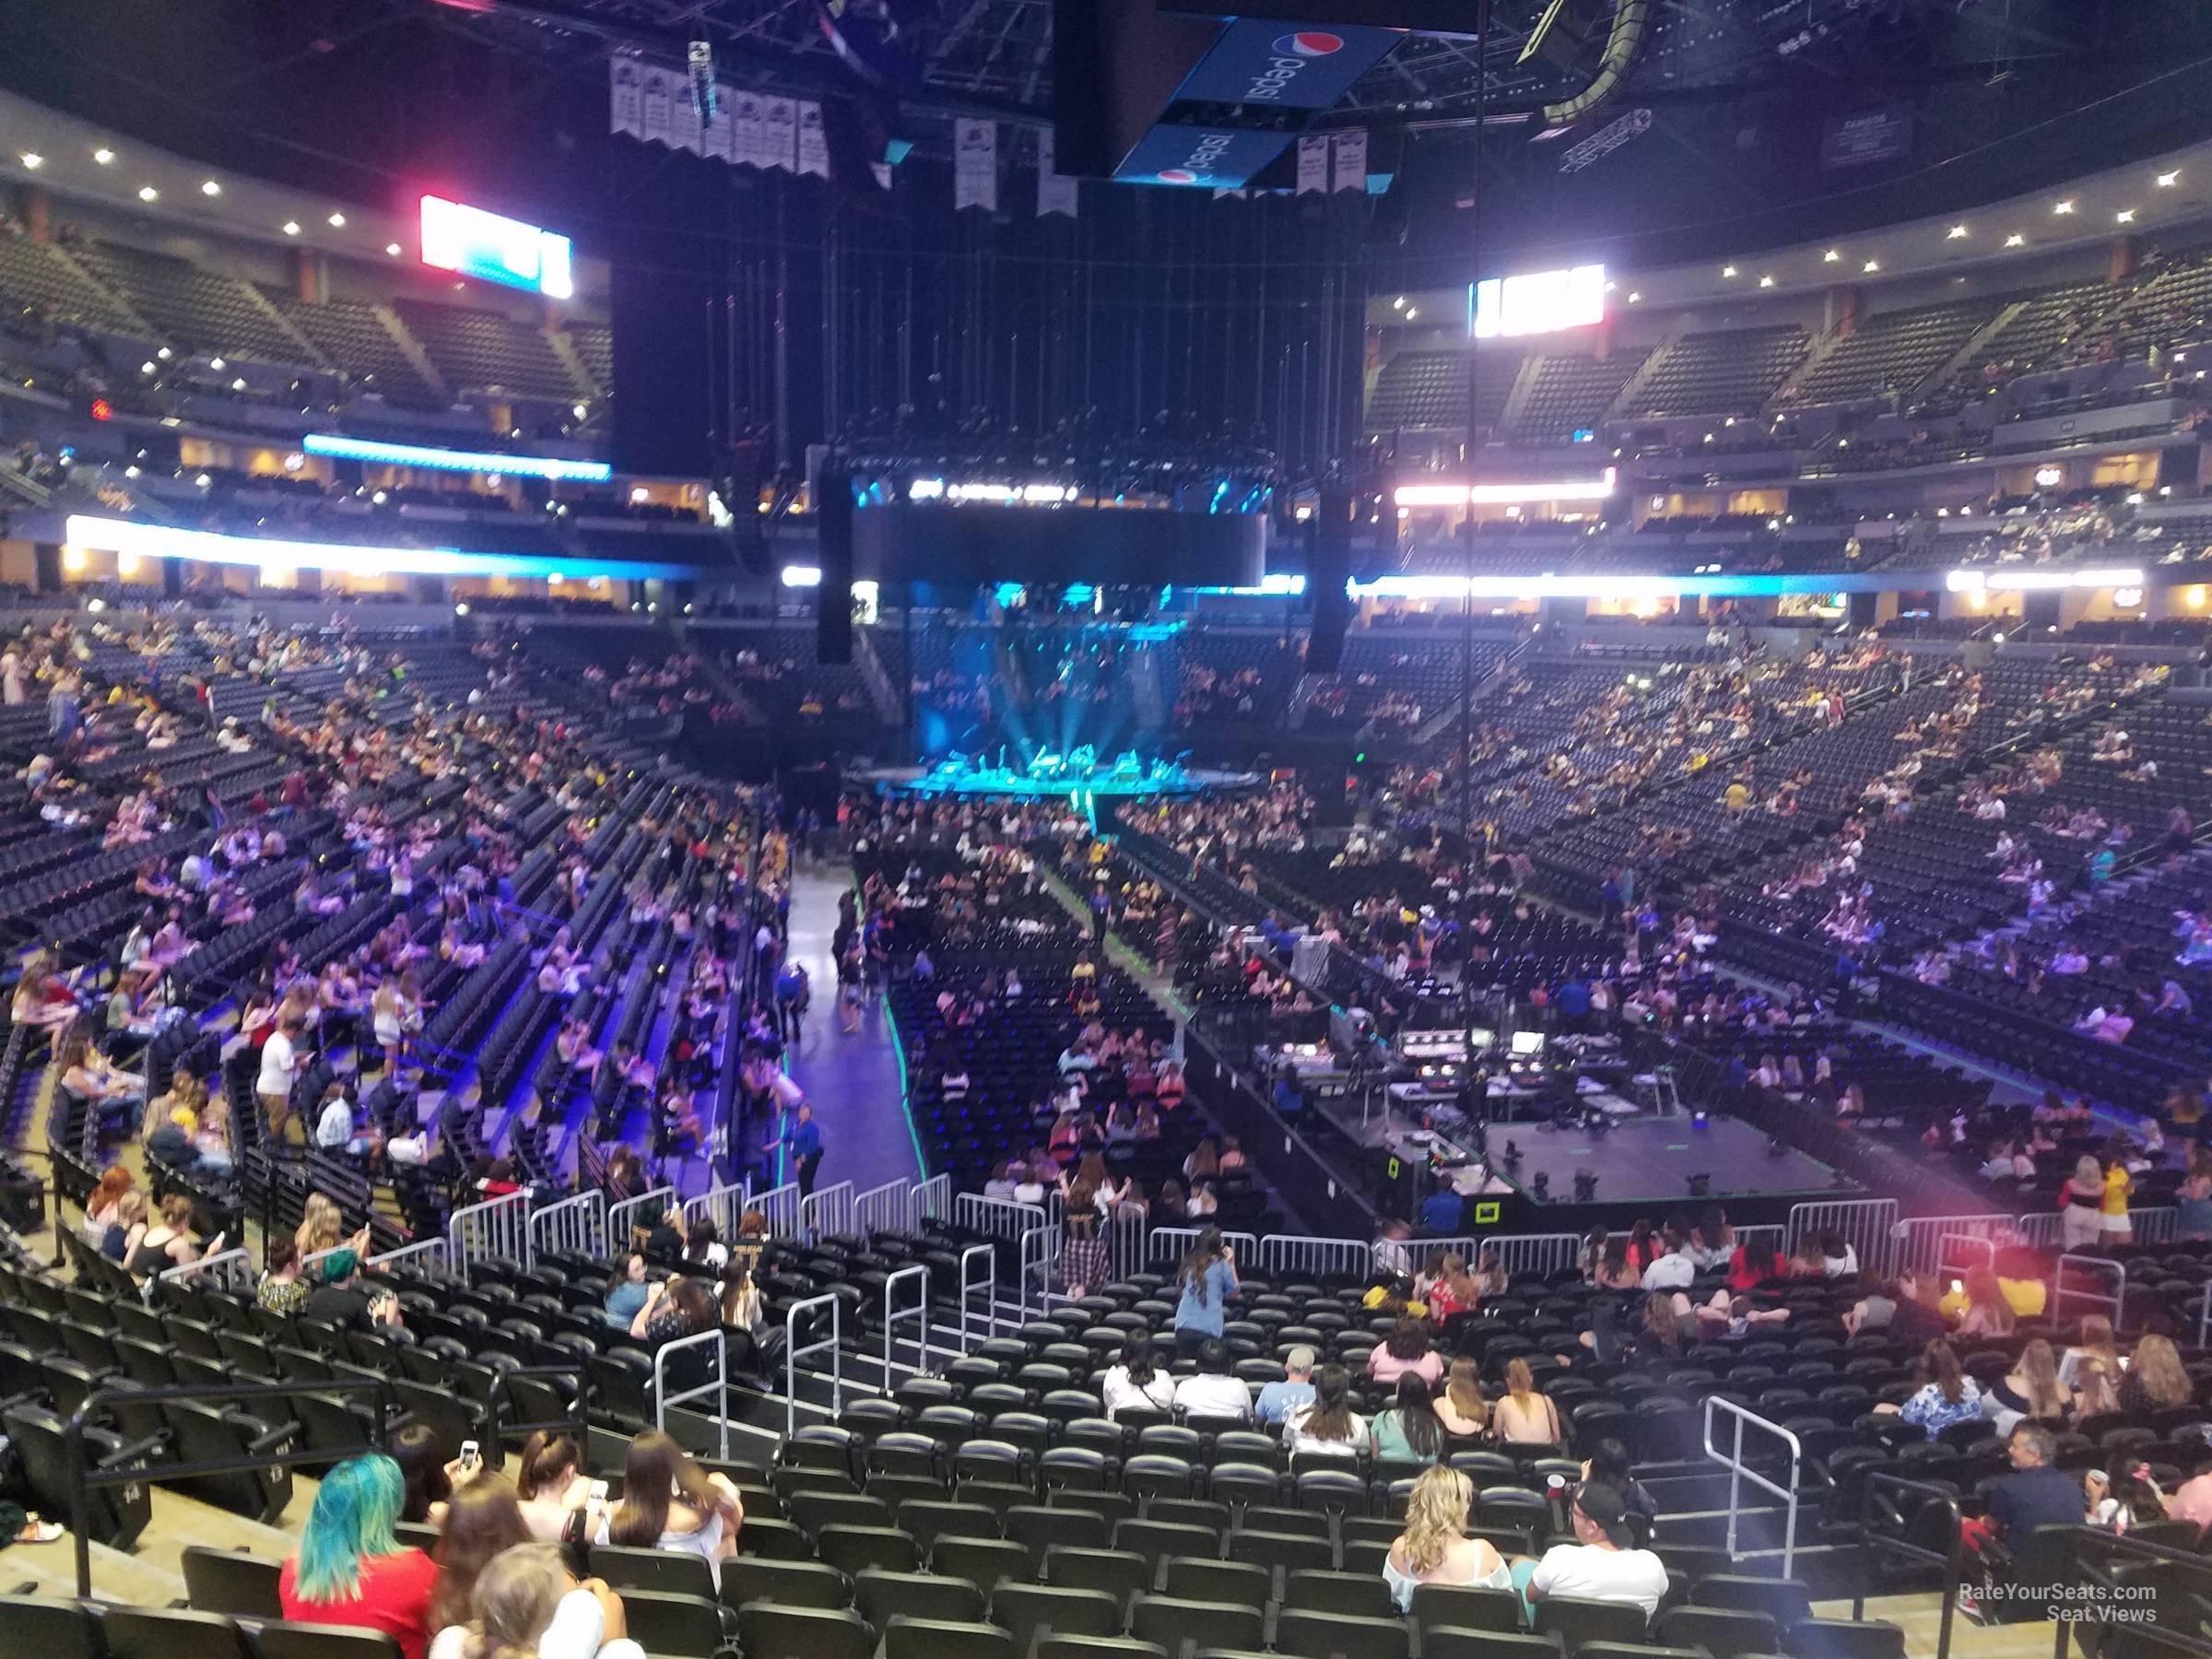 section 116, row 19 seat view  for concert - ball arena